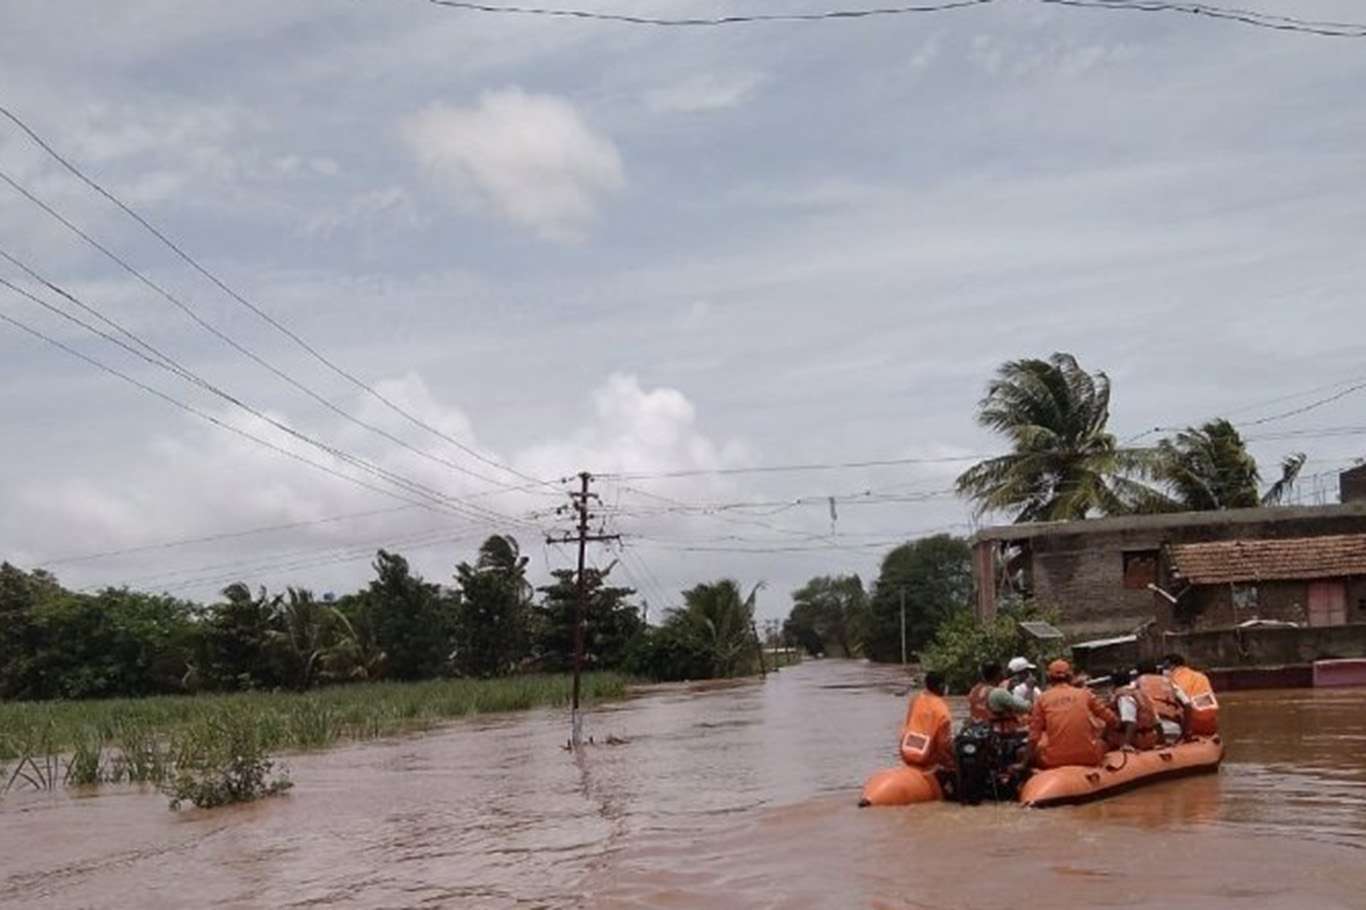 India’s death toll from floods and landslides rises to 164